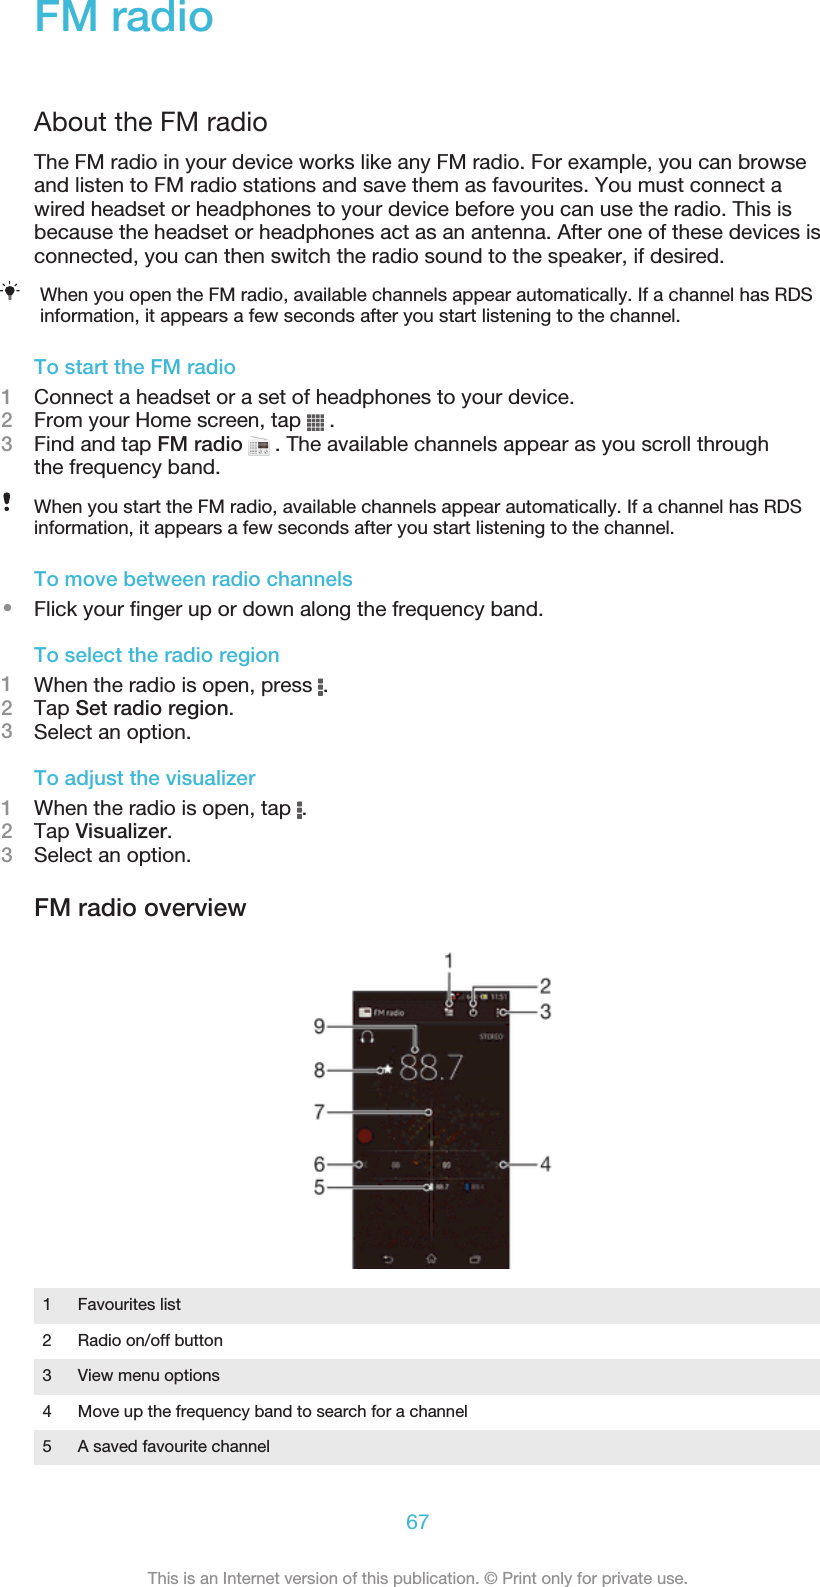 FM radioAbout the FM radioThe FM radio in your device works like any FM radio. For example, you can browseand listen to FM radio stations and save them as favourites. You must connect awired headset or headphones to your device before you can use the radio. This isbecause the headset or headphones act as an antenna. After one of these devices isconnected, you can then switch the radio sound to the speaker, if desired.When you open the FM radio, available channels appear automatically. If a channel has RDSinformation, it appears a few seconds after you start listening to the channel.To start the FM radio1Connect a headset or a set of headphones to your device.2From your Home screen, tap   .3Find and tap FM radio   . The available channels appear as you scroll throughthe frequency band.When you start the FM radio, available channels appear automatically. If a channel has RDSinformation, it appears a few seconds after you start listening to the channel.To move between radio channels•Flick your finger up or down along the frequency band.To select the radio region1When the radio is open, press  .2Tap Set radio region.3Select an option.To adjust the visualizer1When the radio is open, tap  .2Tap Visualizer.3Select an option.FM radio overview1Favourites list2 Radio on/off button3 View menu options4 Move up the frequency band to search for a channel5 A saved favourite channel67This is an Internet version of this publication. © Print only for private use.